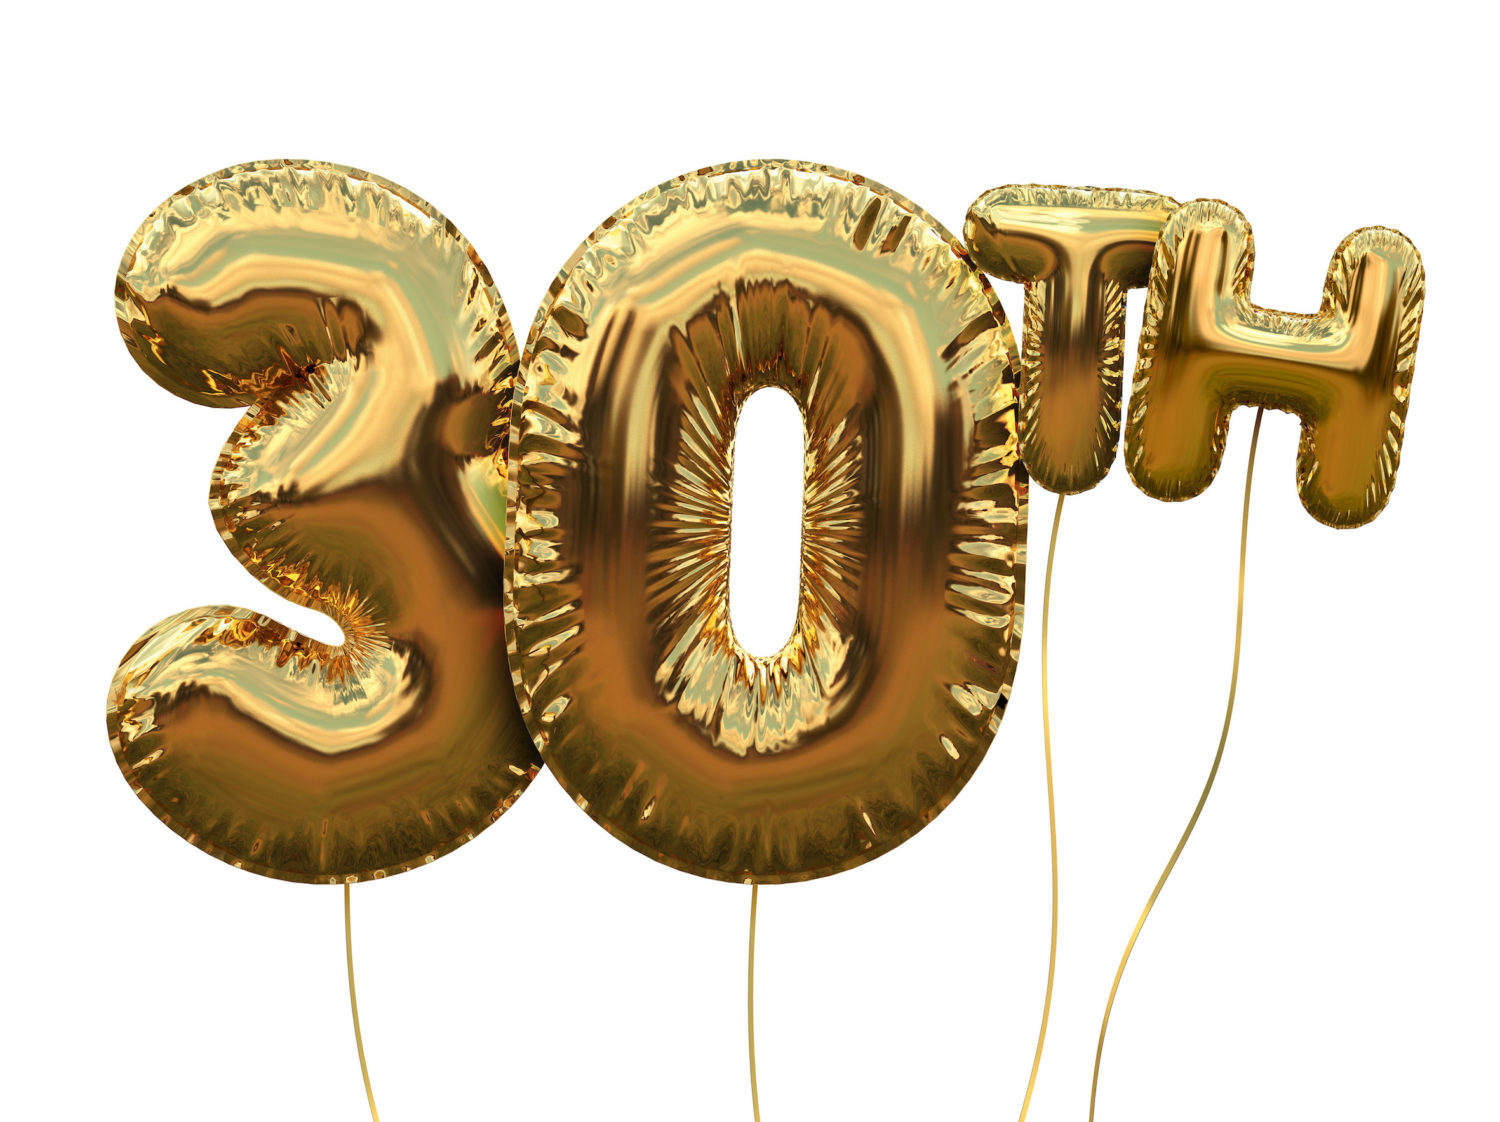 gold-number-30-foil-birthday-balloon-isolated-on-white-golden-party